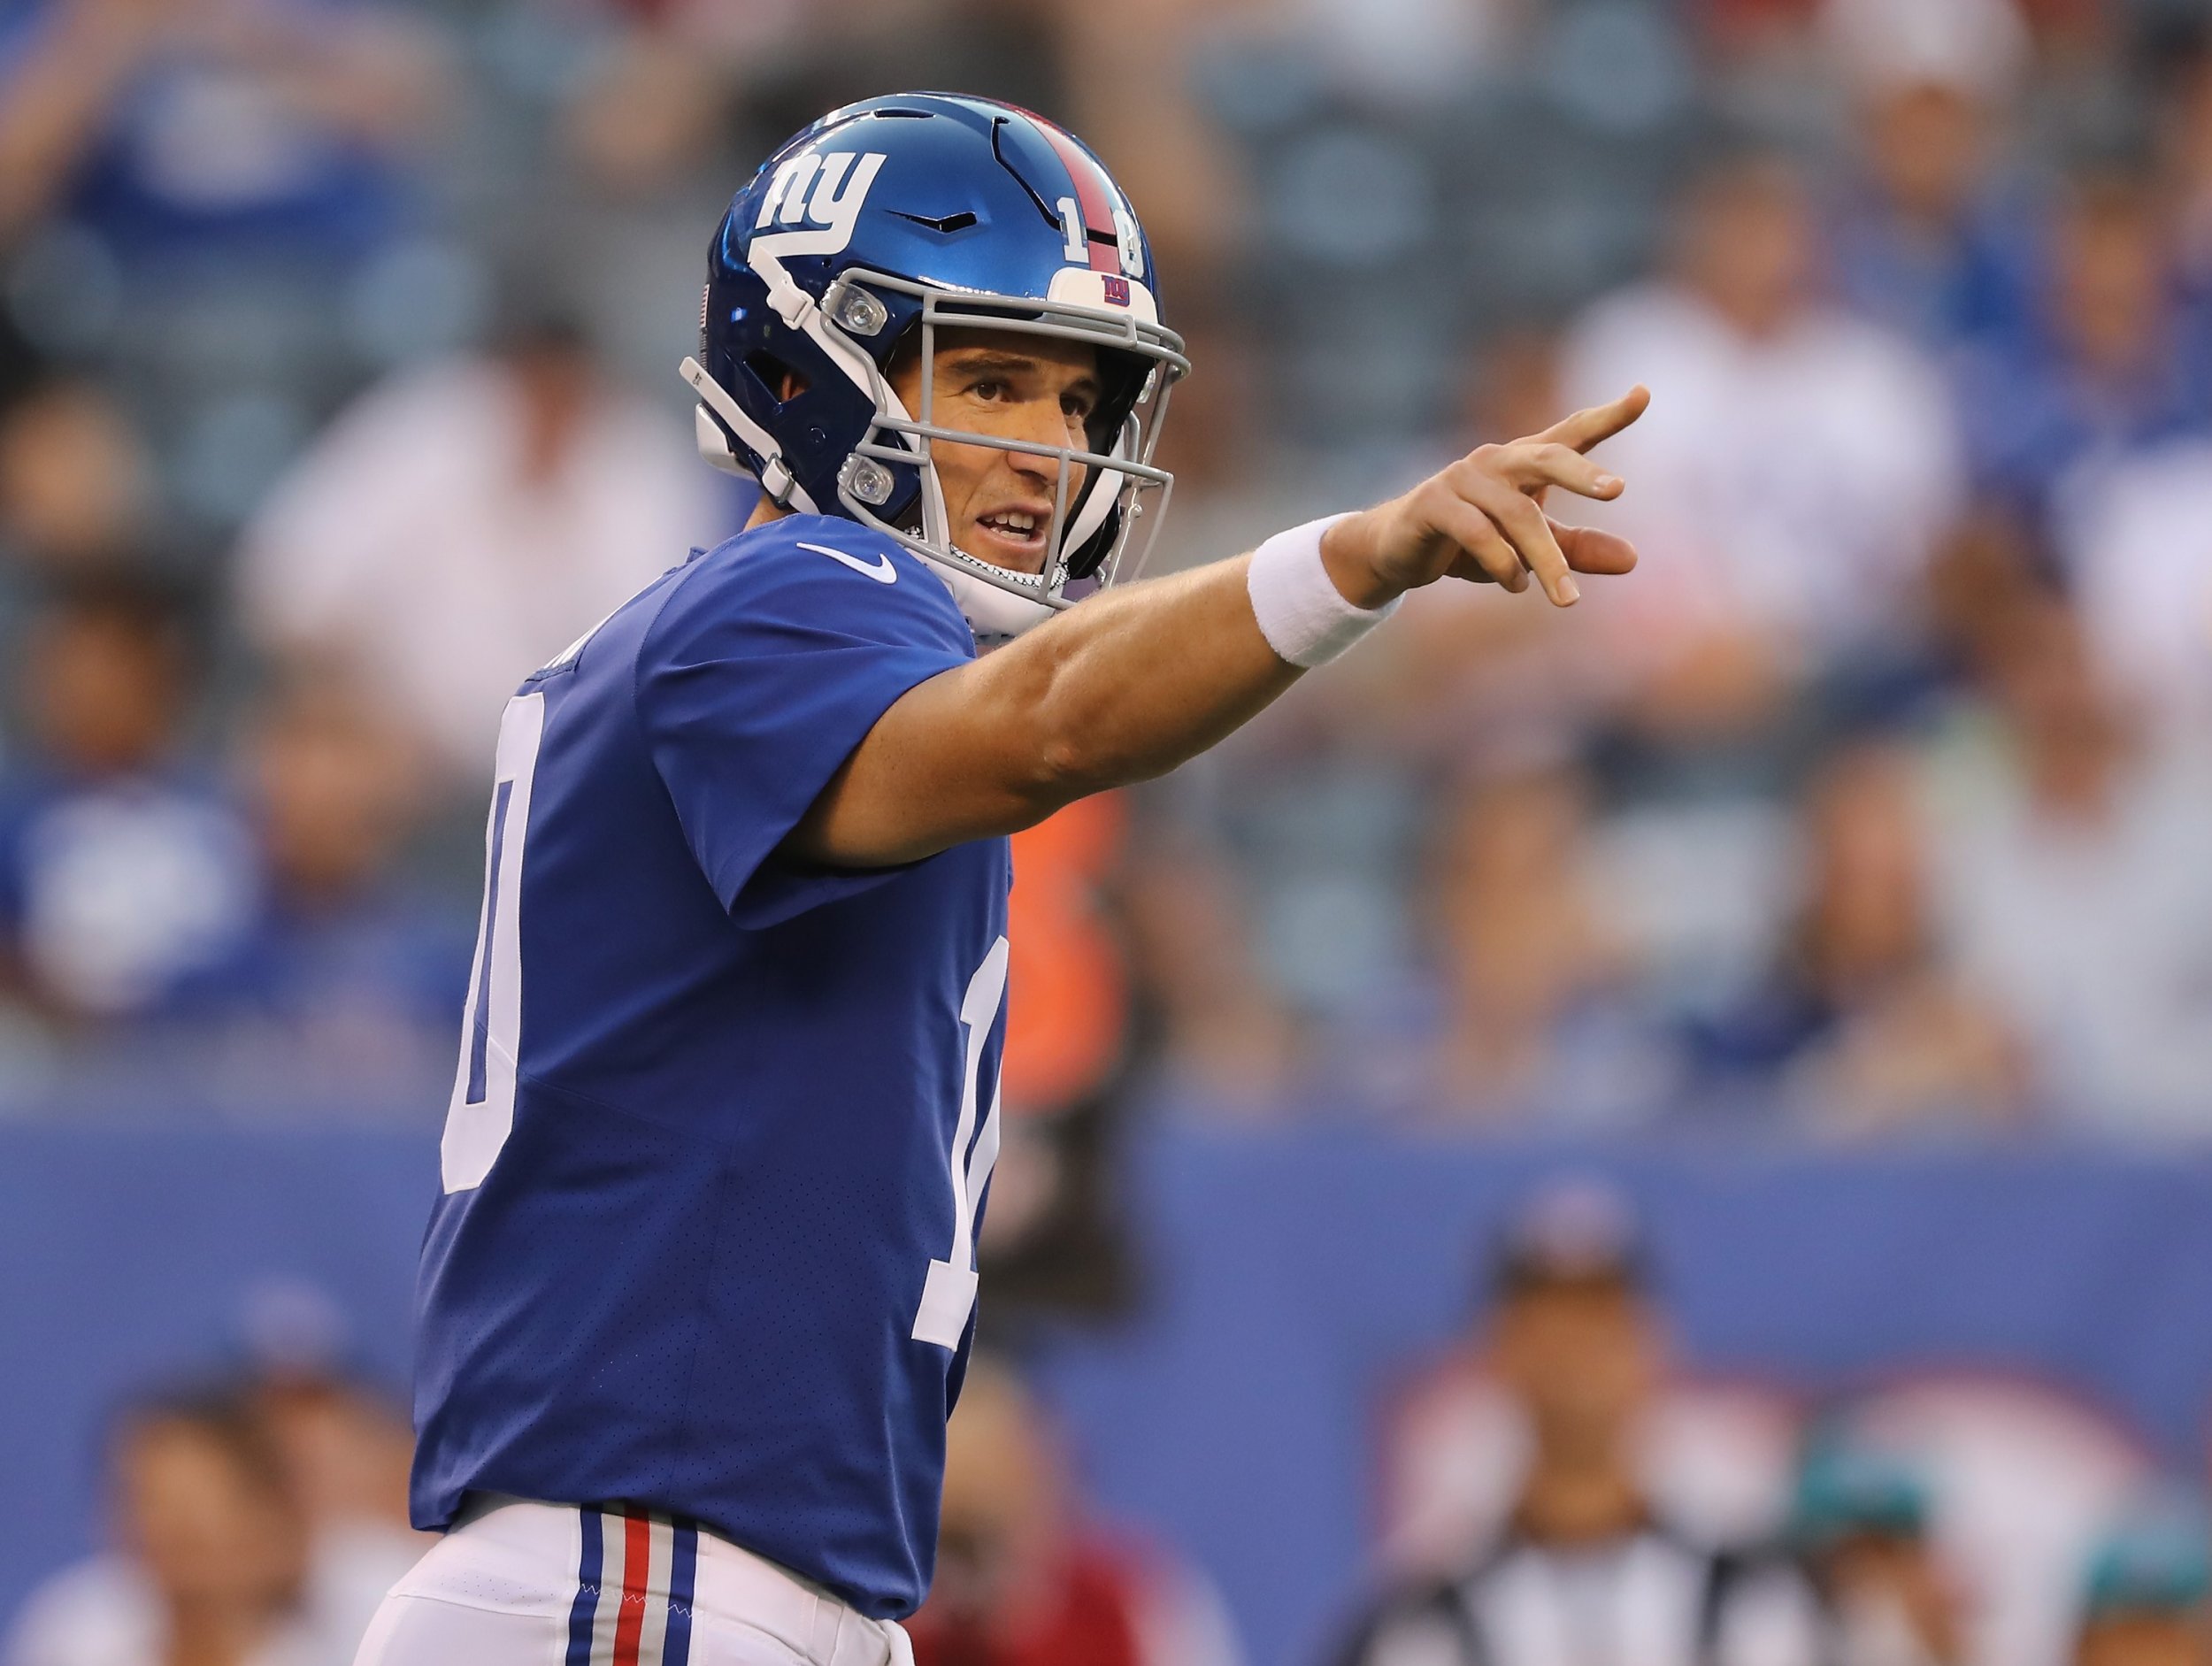 NFL Week 2 Sunday Night: What Time, TV Channel Is Dallas Cowboys vs. New  York Giants? Cowboys vs. Giants Livestream, Score Update, Watch Online